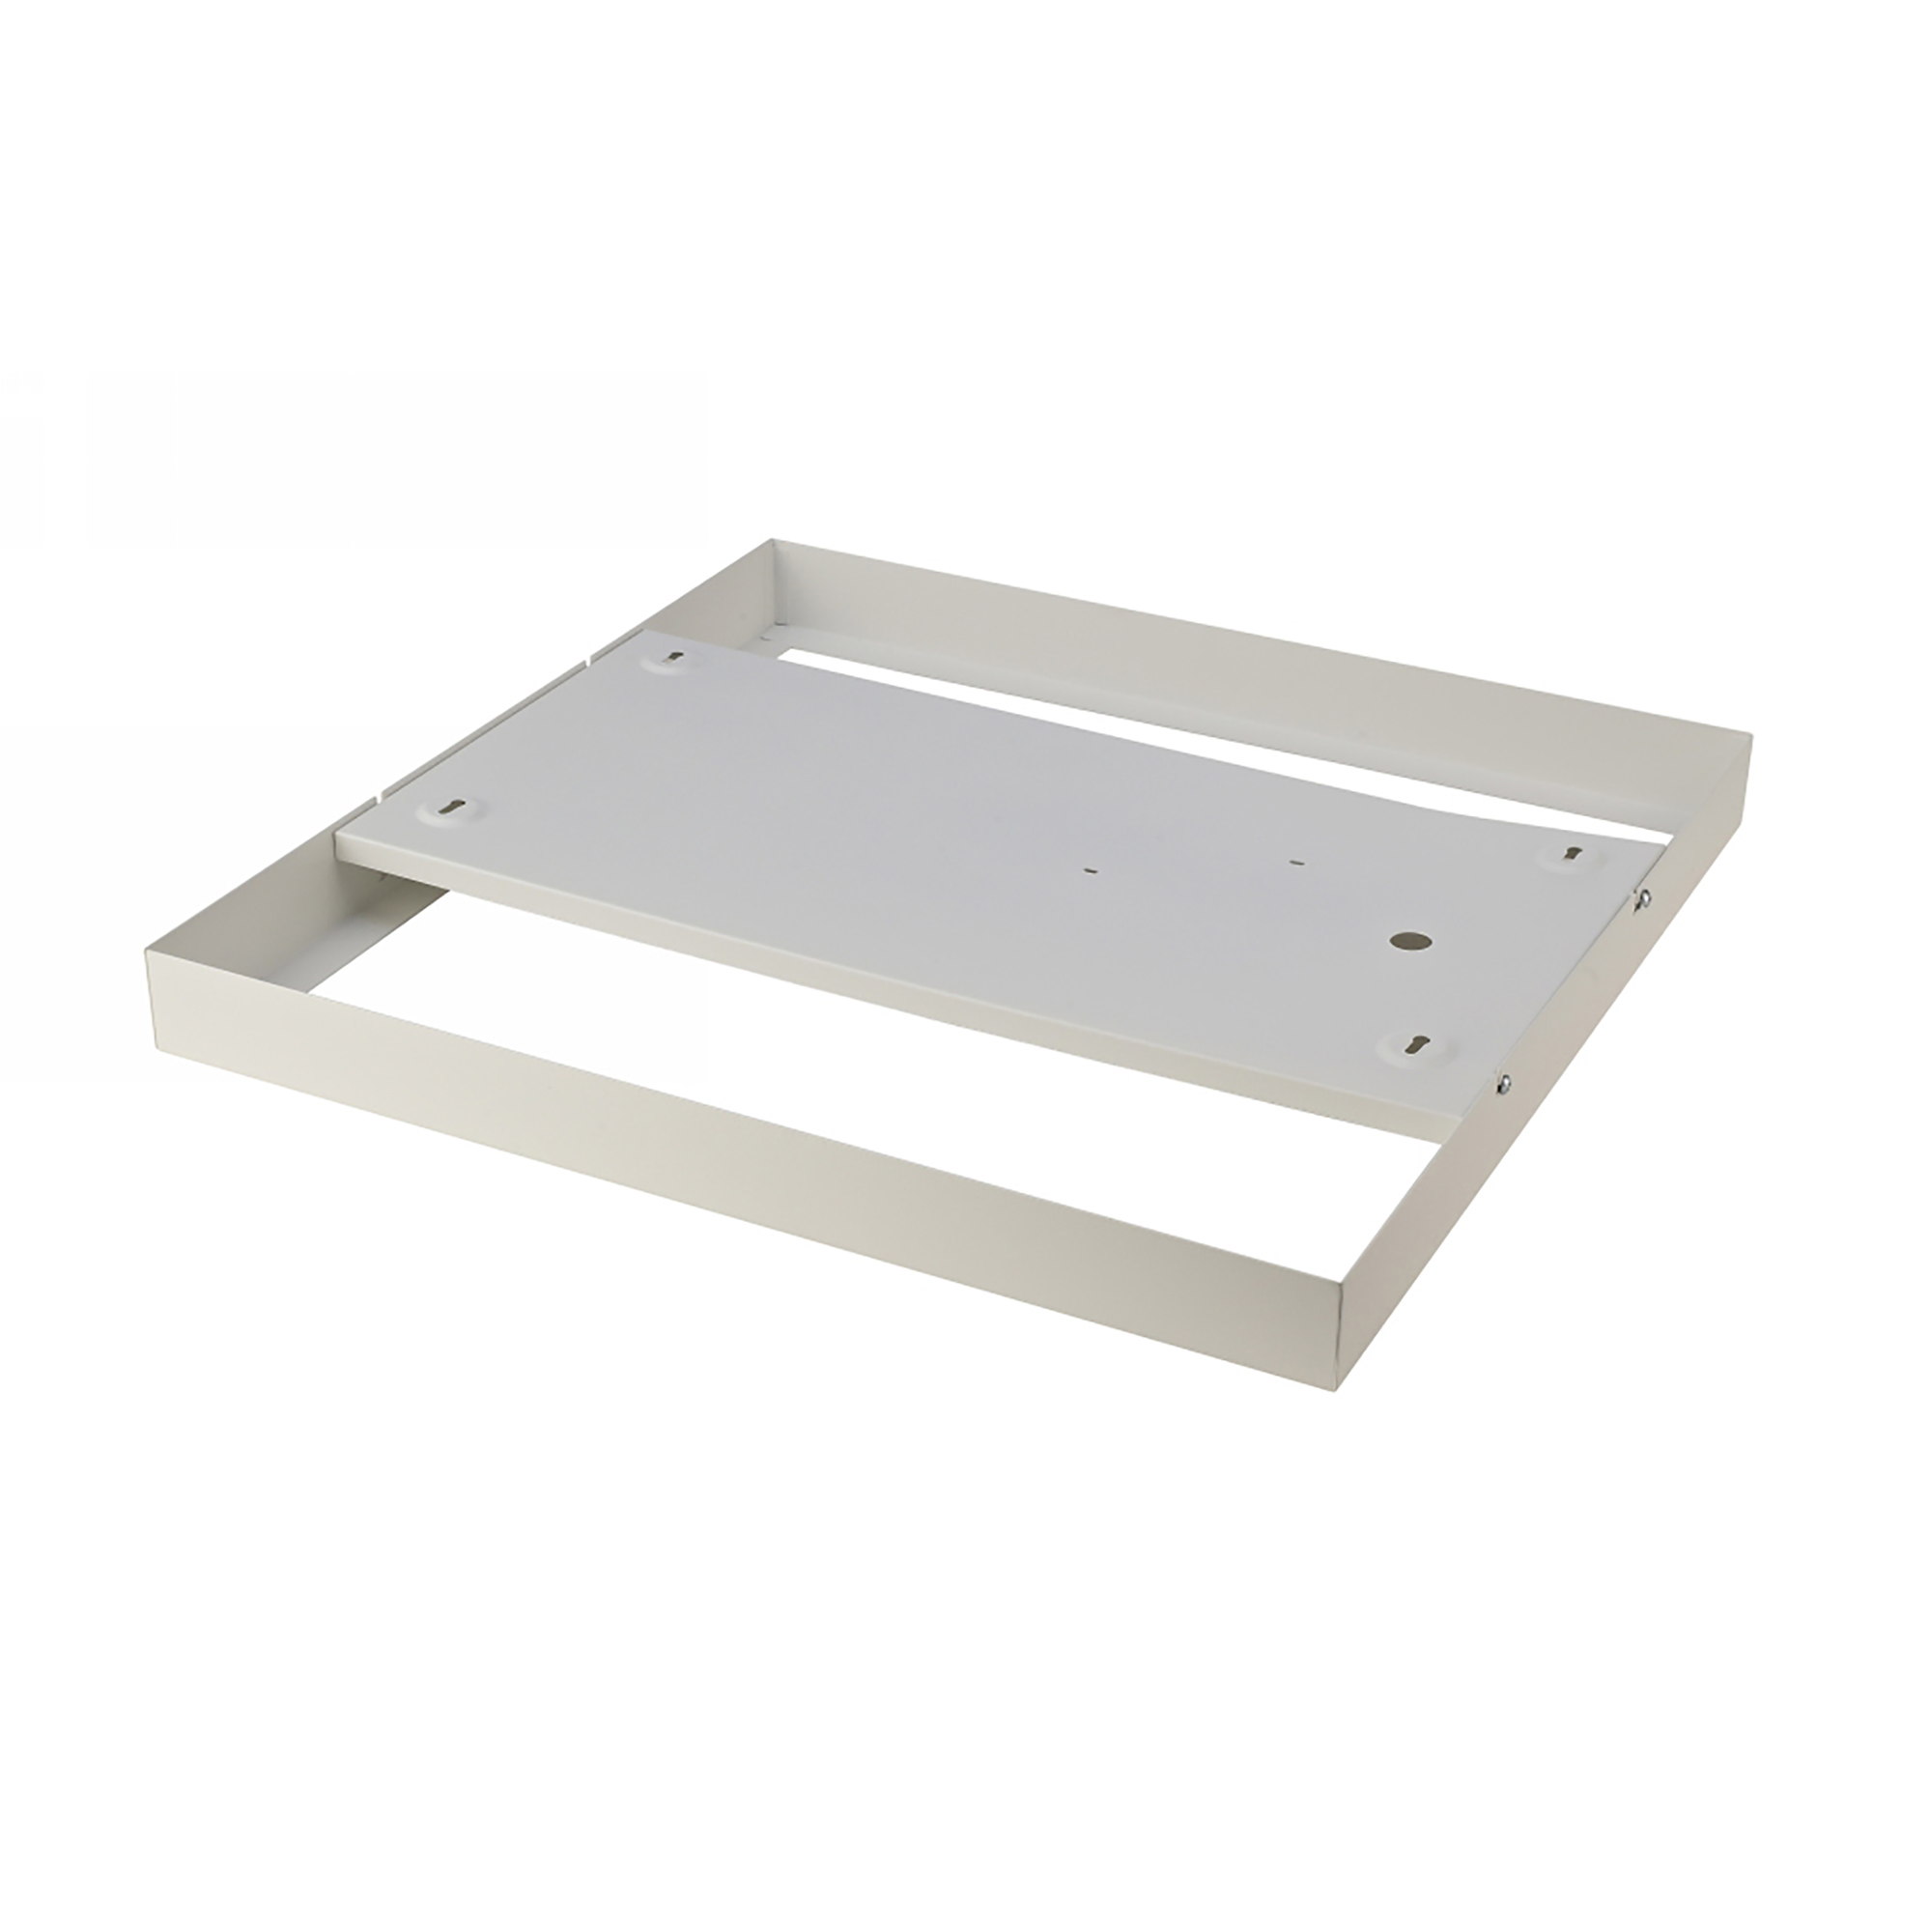 DA240005/TW  Piano 66 Surface Mounting Frame In Textured White For Panel 595x595mm; 5yrs Warranty